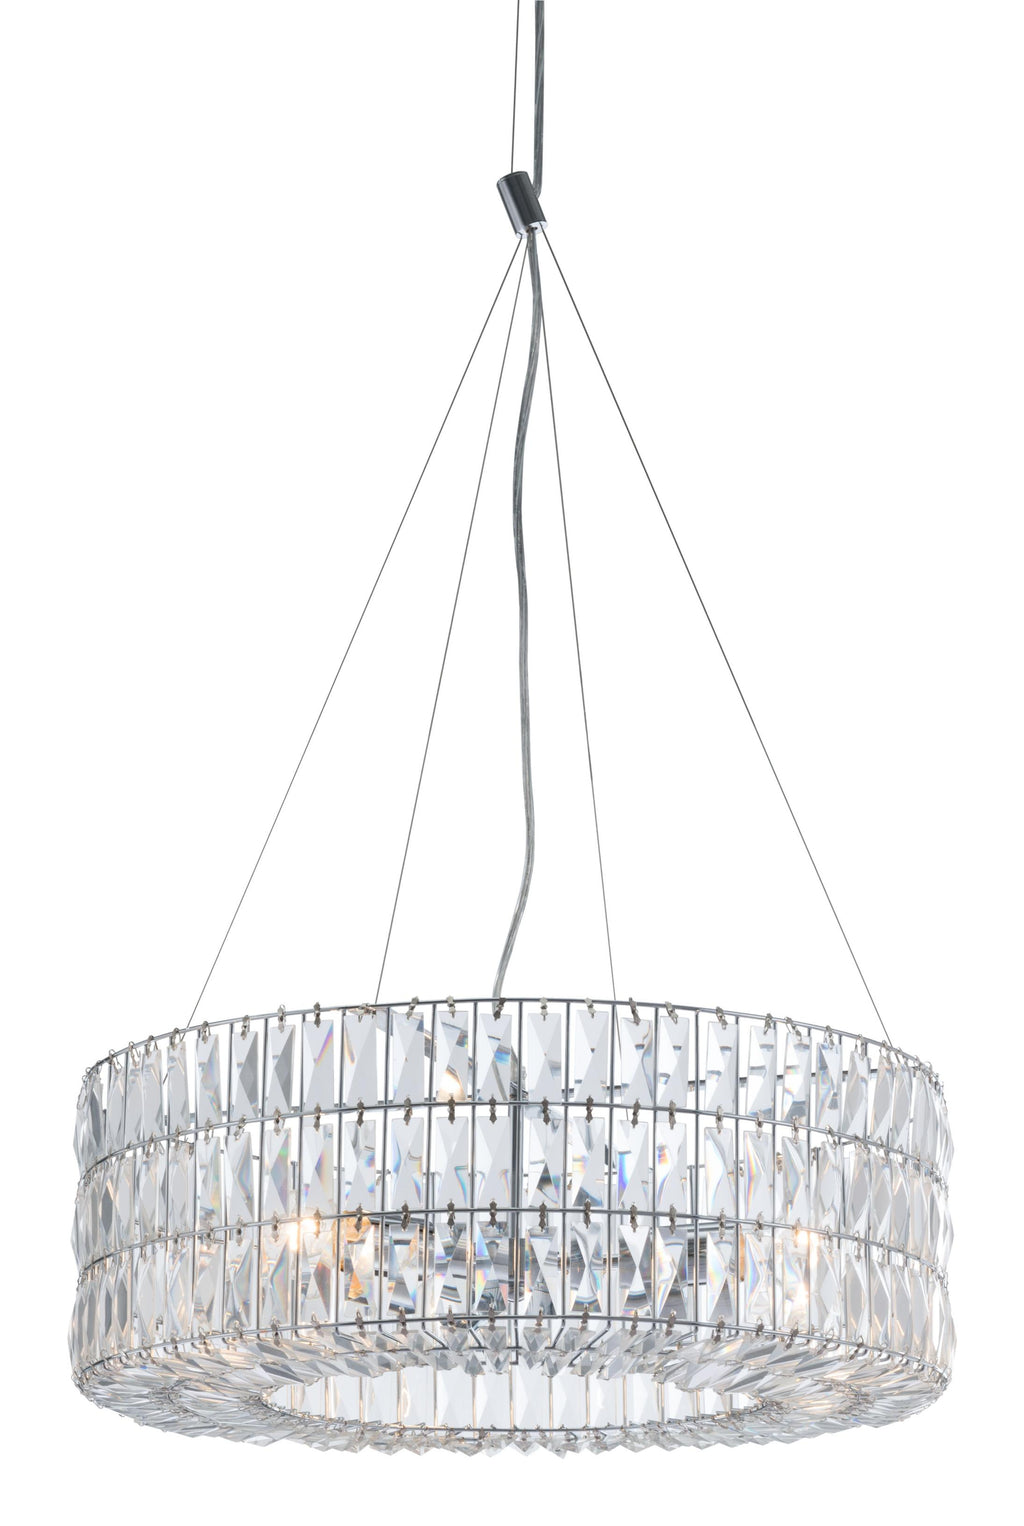 Mod Chrome and Crystal Bling Chandelier - 99fab 